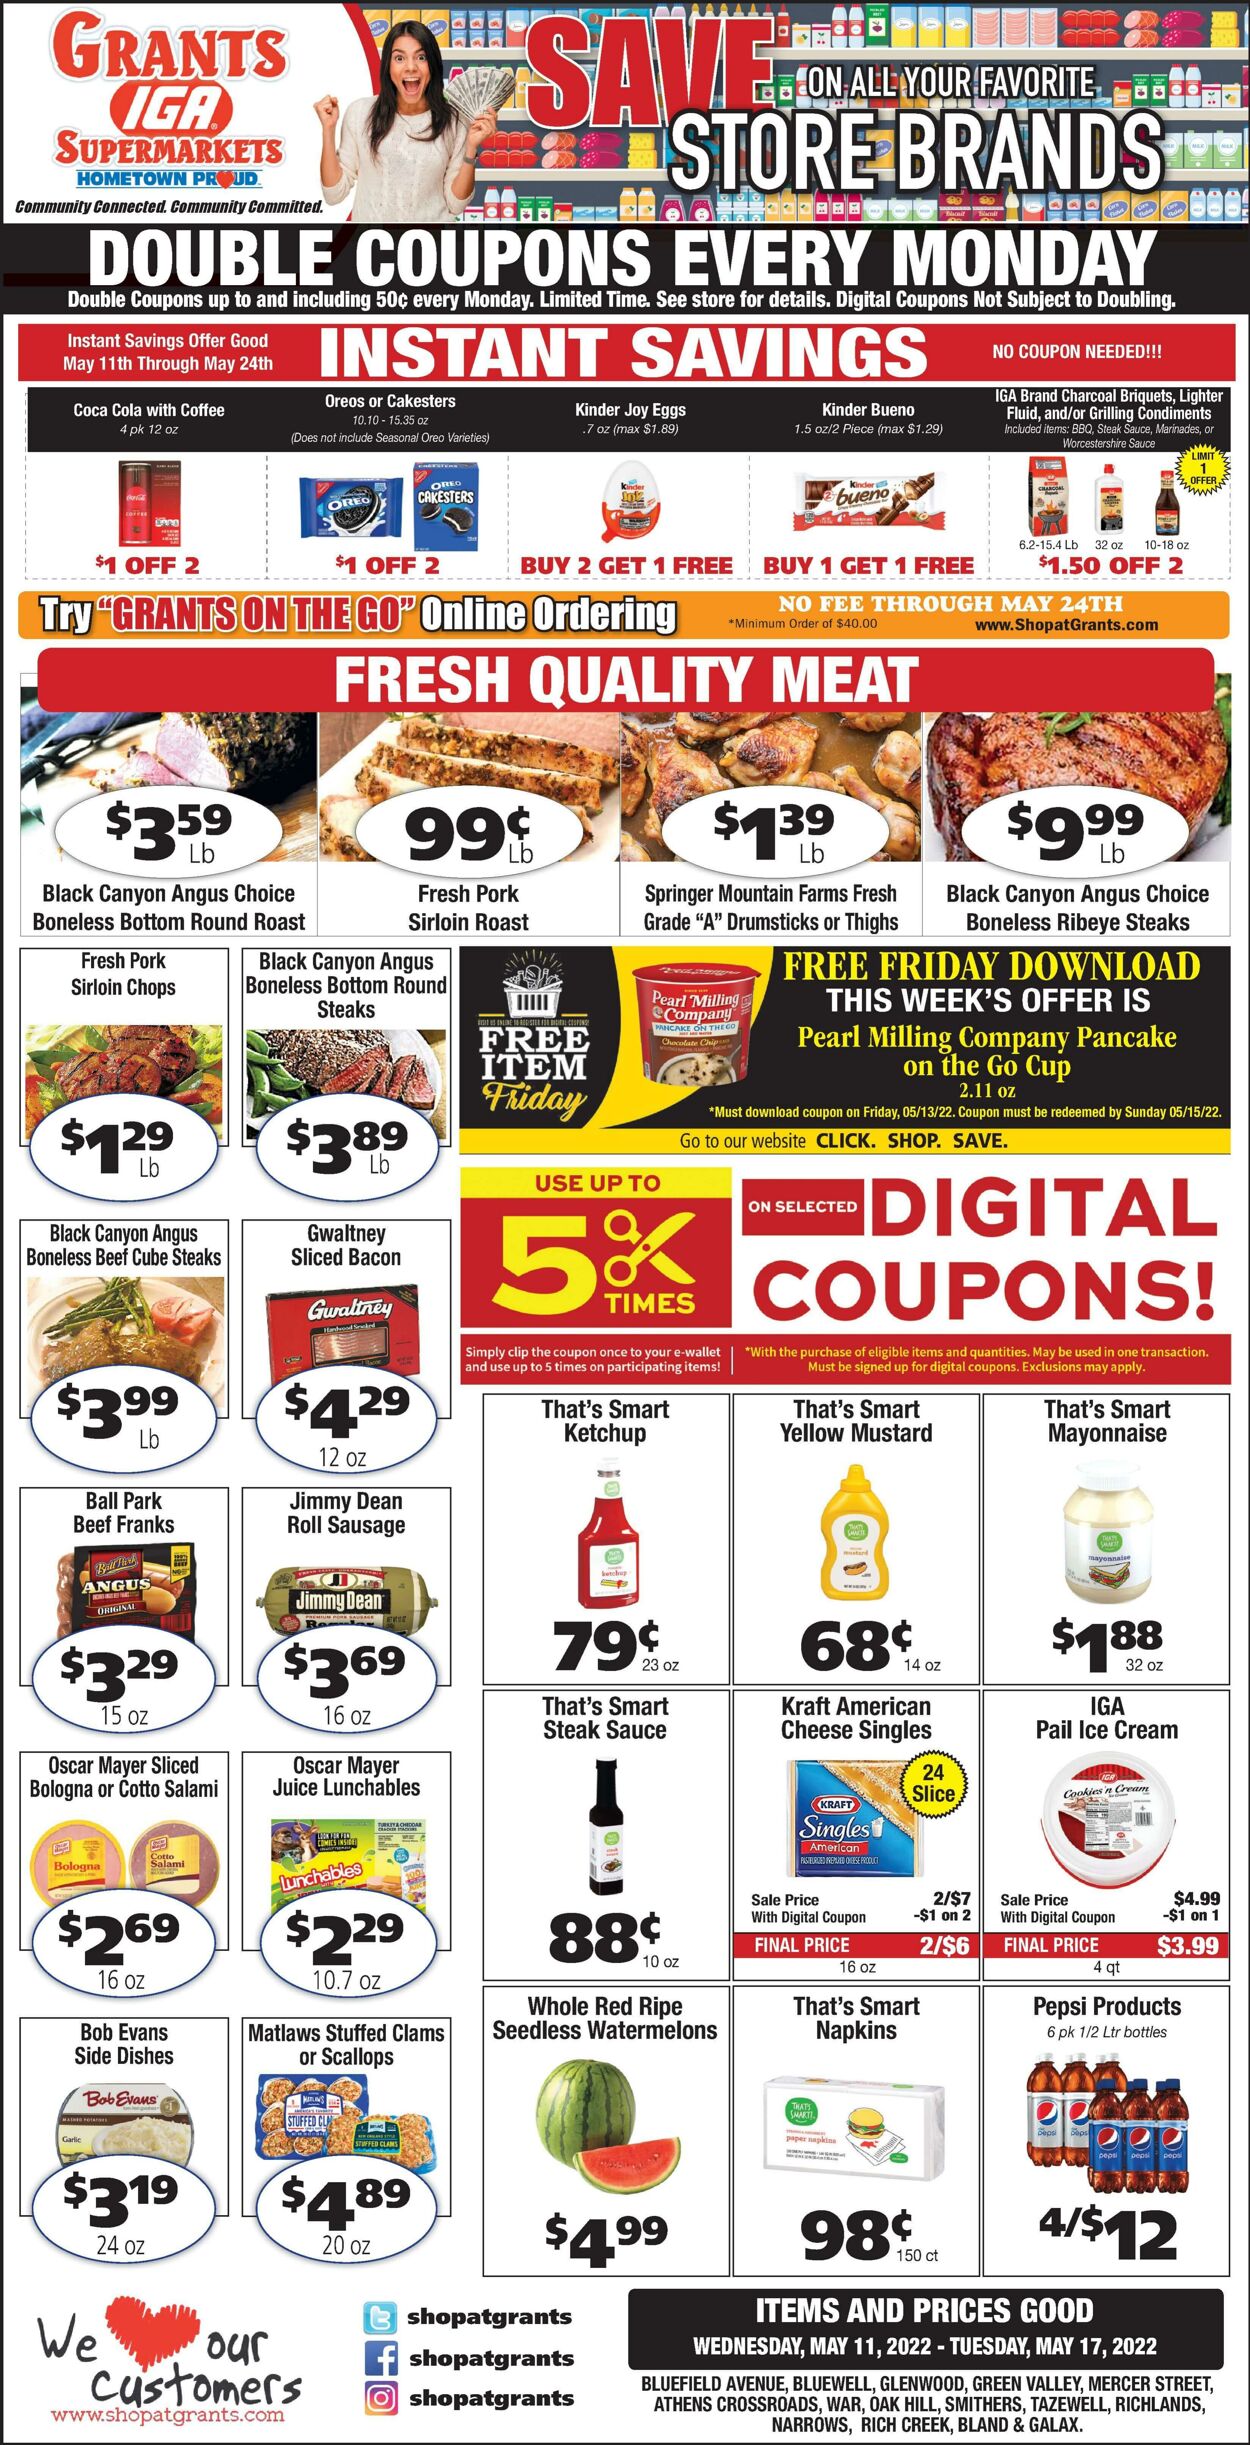 Weekly ad Grant's Supermarkets 05/11/2022 - 05/17/2022